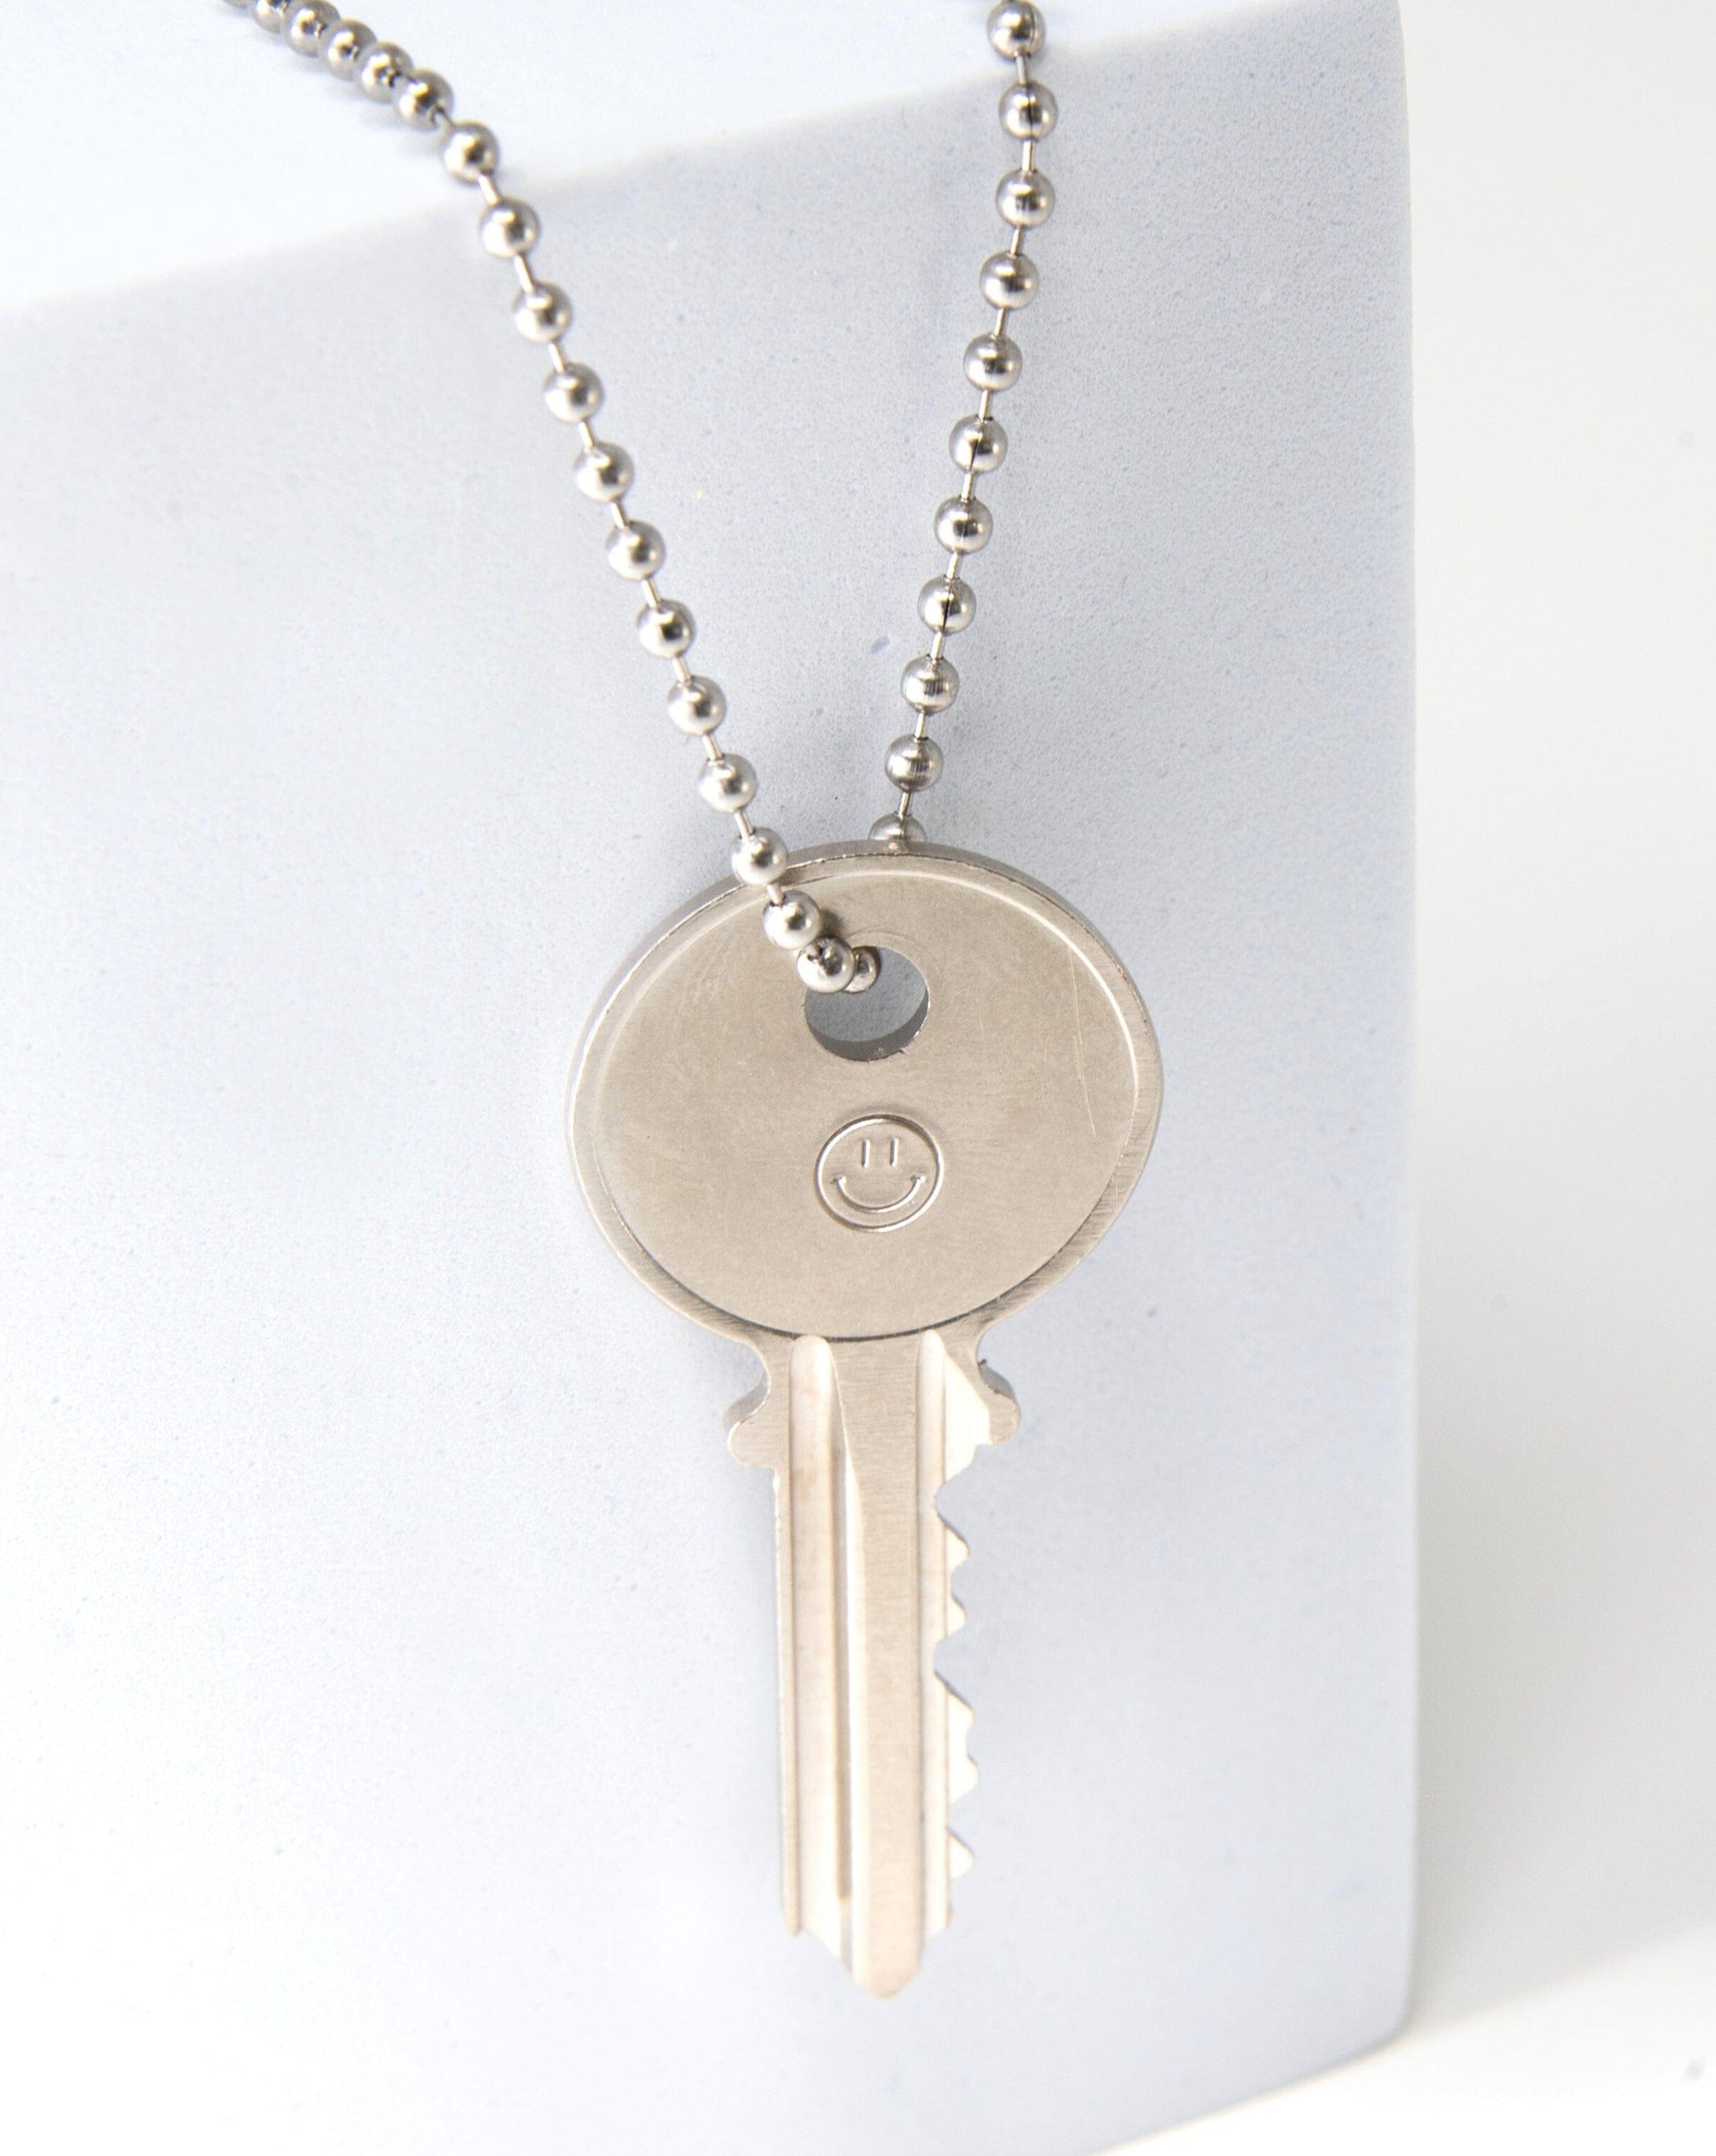 Symbol Classic Ball Chain Key Necklace Necklaces The Giving Keys SMILEY FACE Silver Ball 